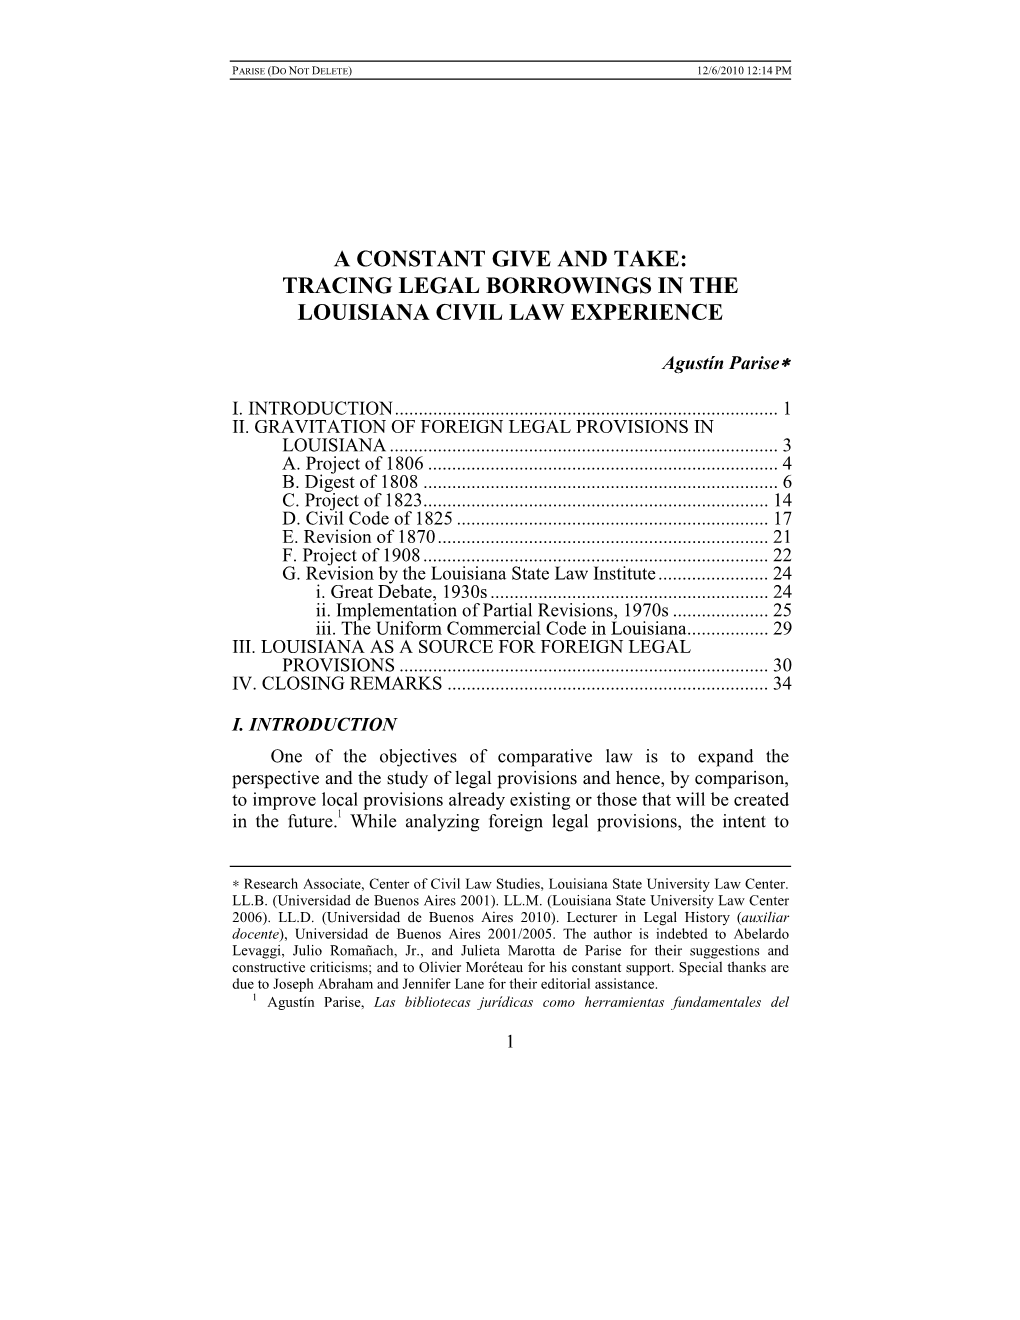 A Constant Give and Take: Tracing Legal Borrowings in the Louisiana Civil Law Experience